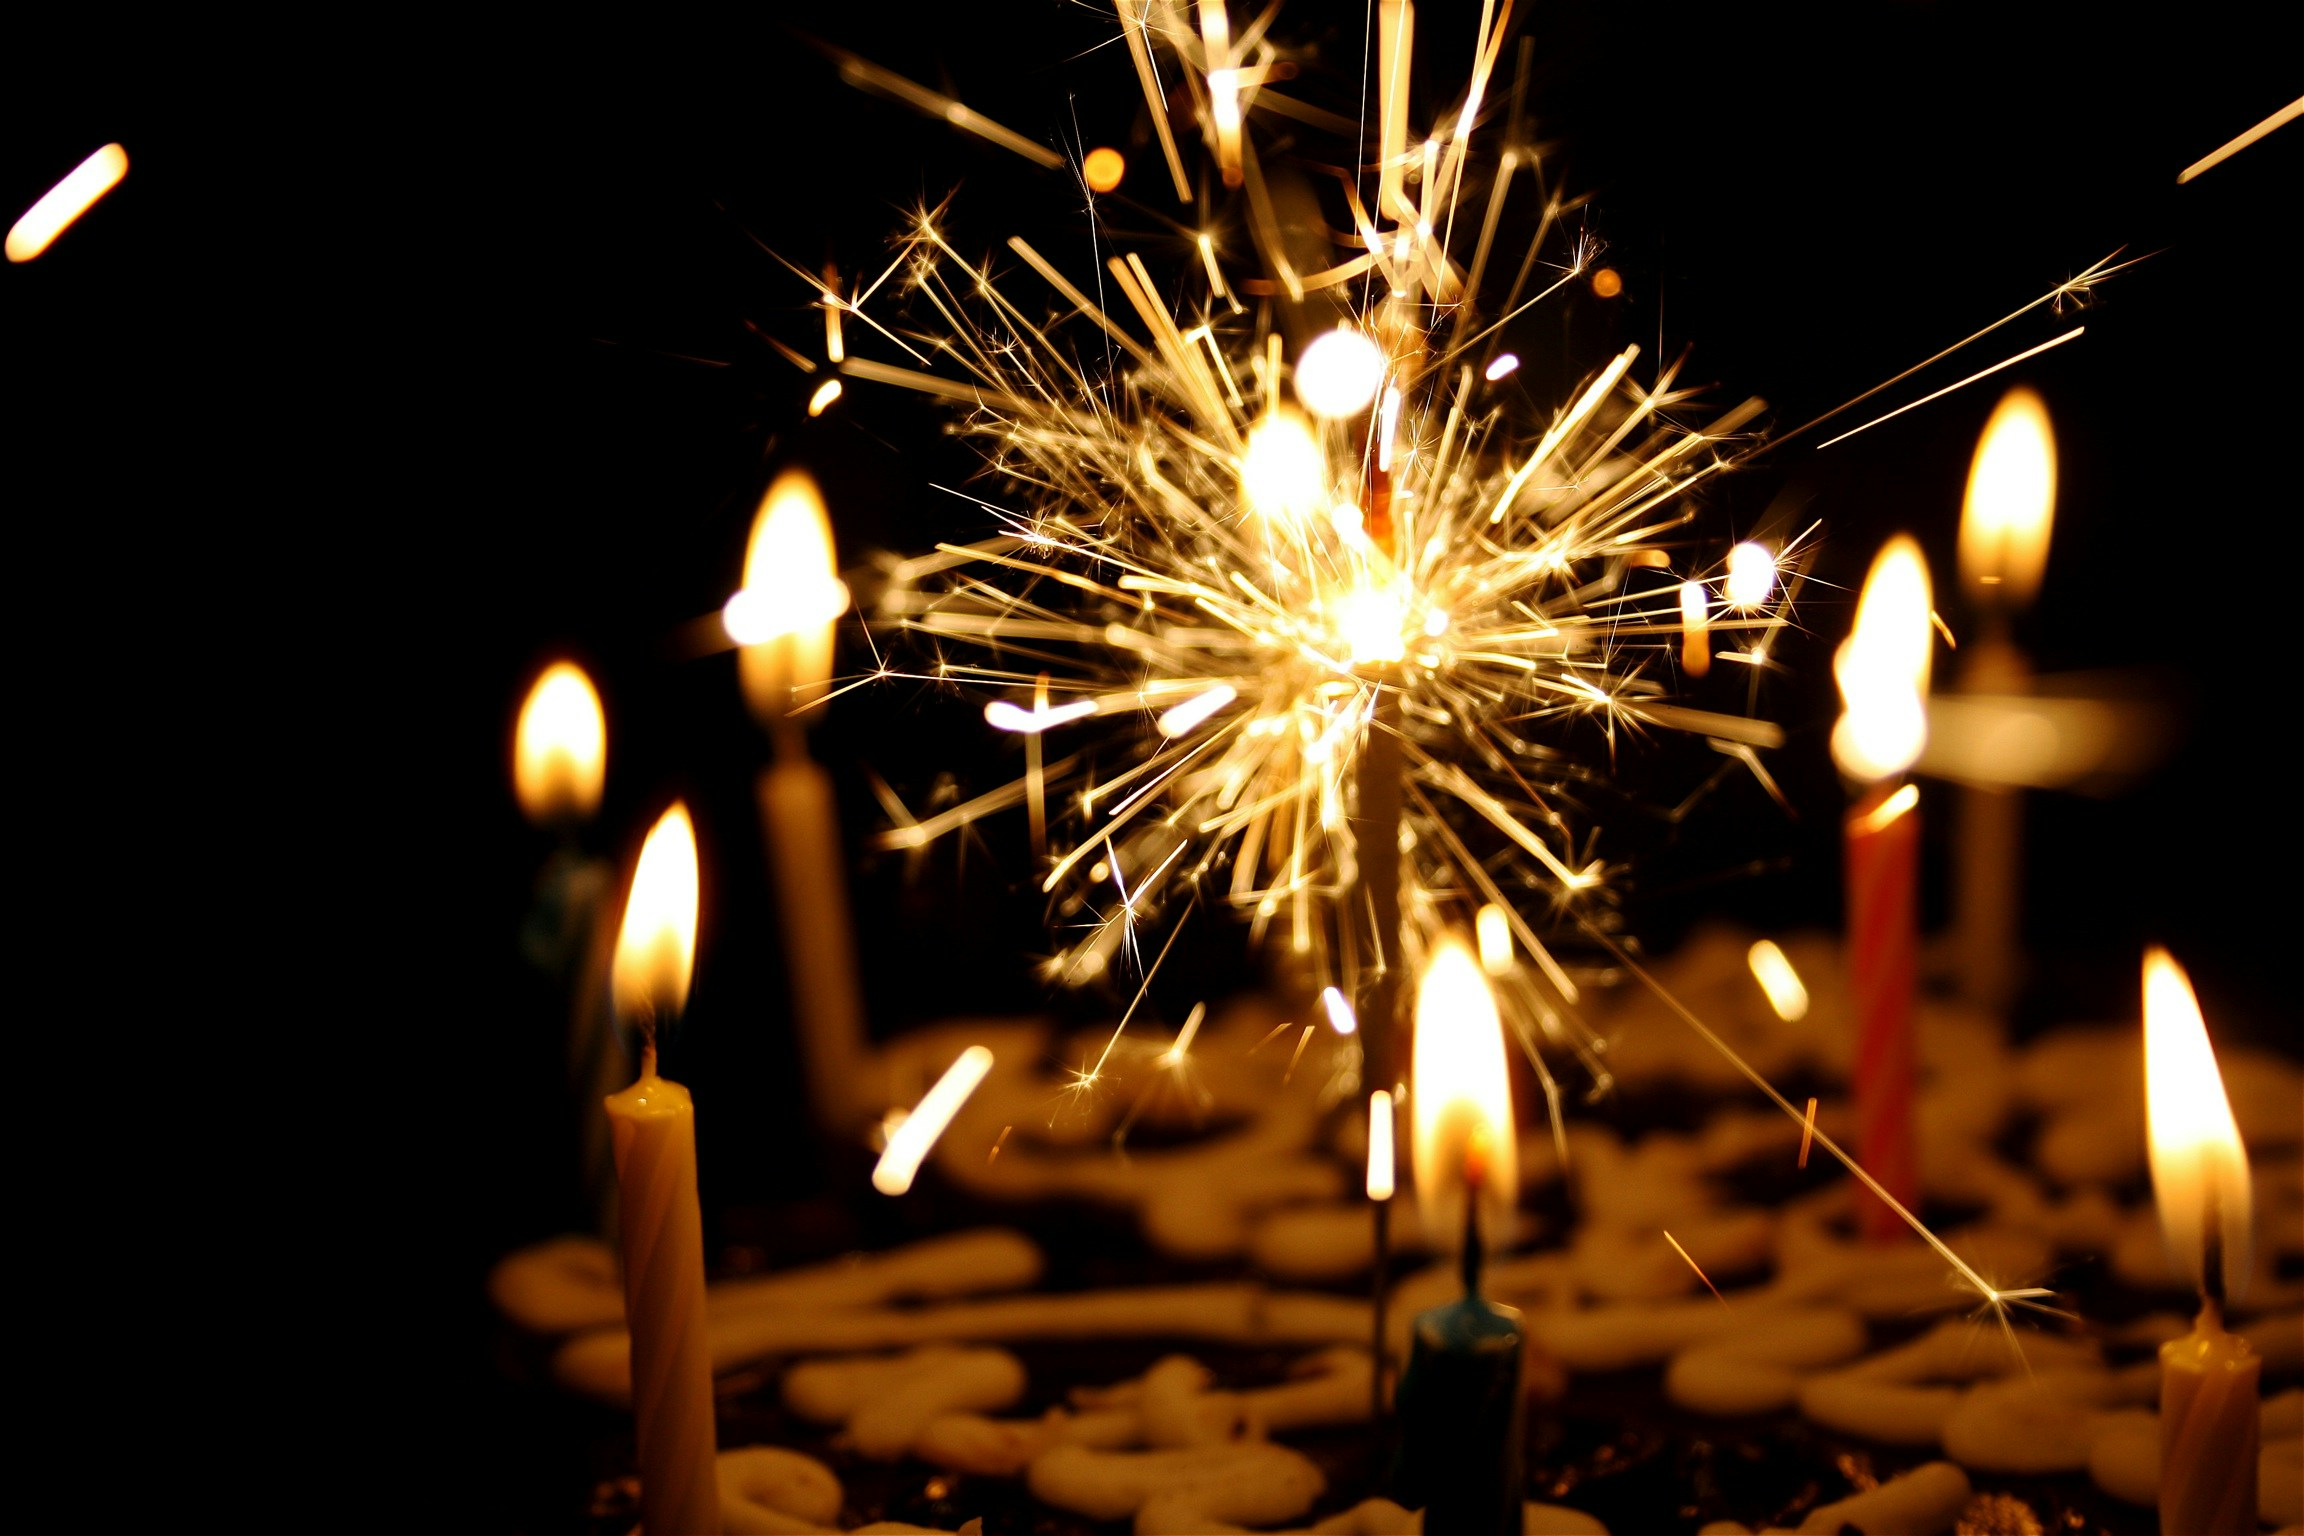 this is an image of birthday cake with candles in the middle